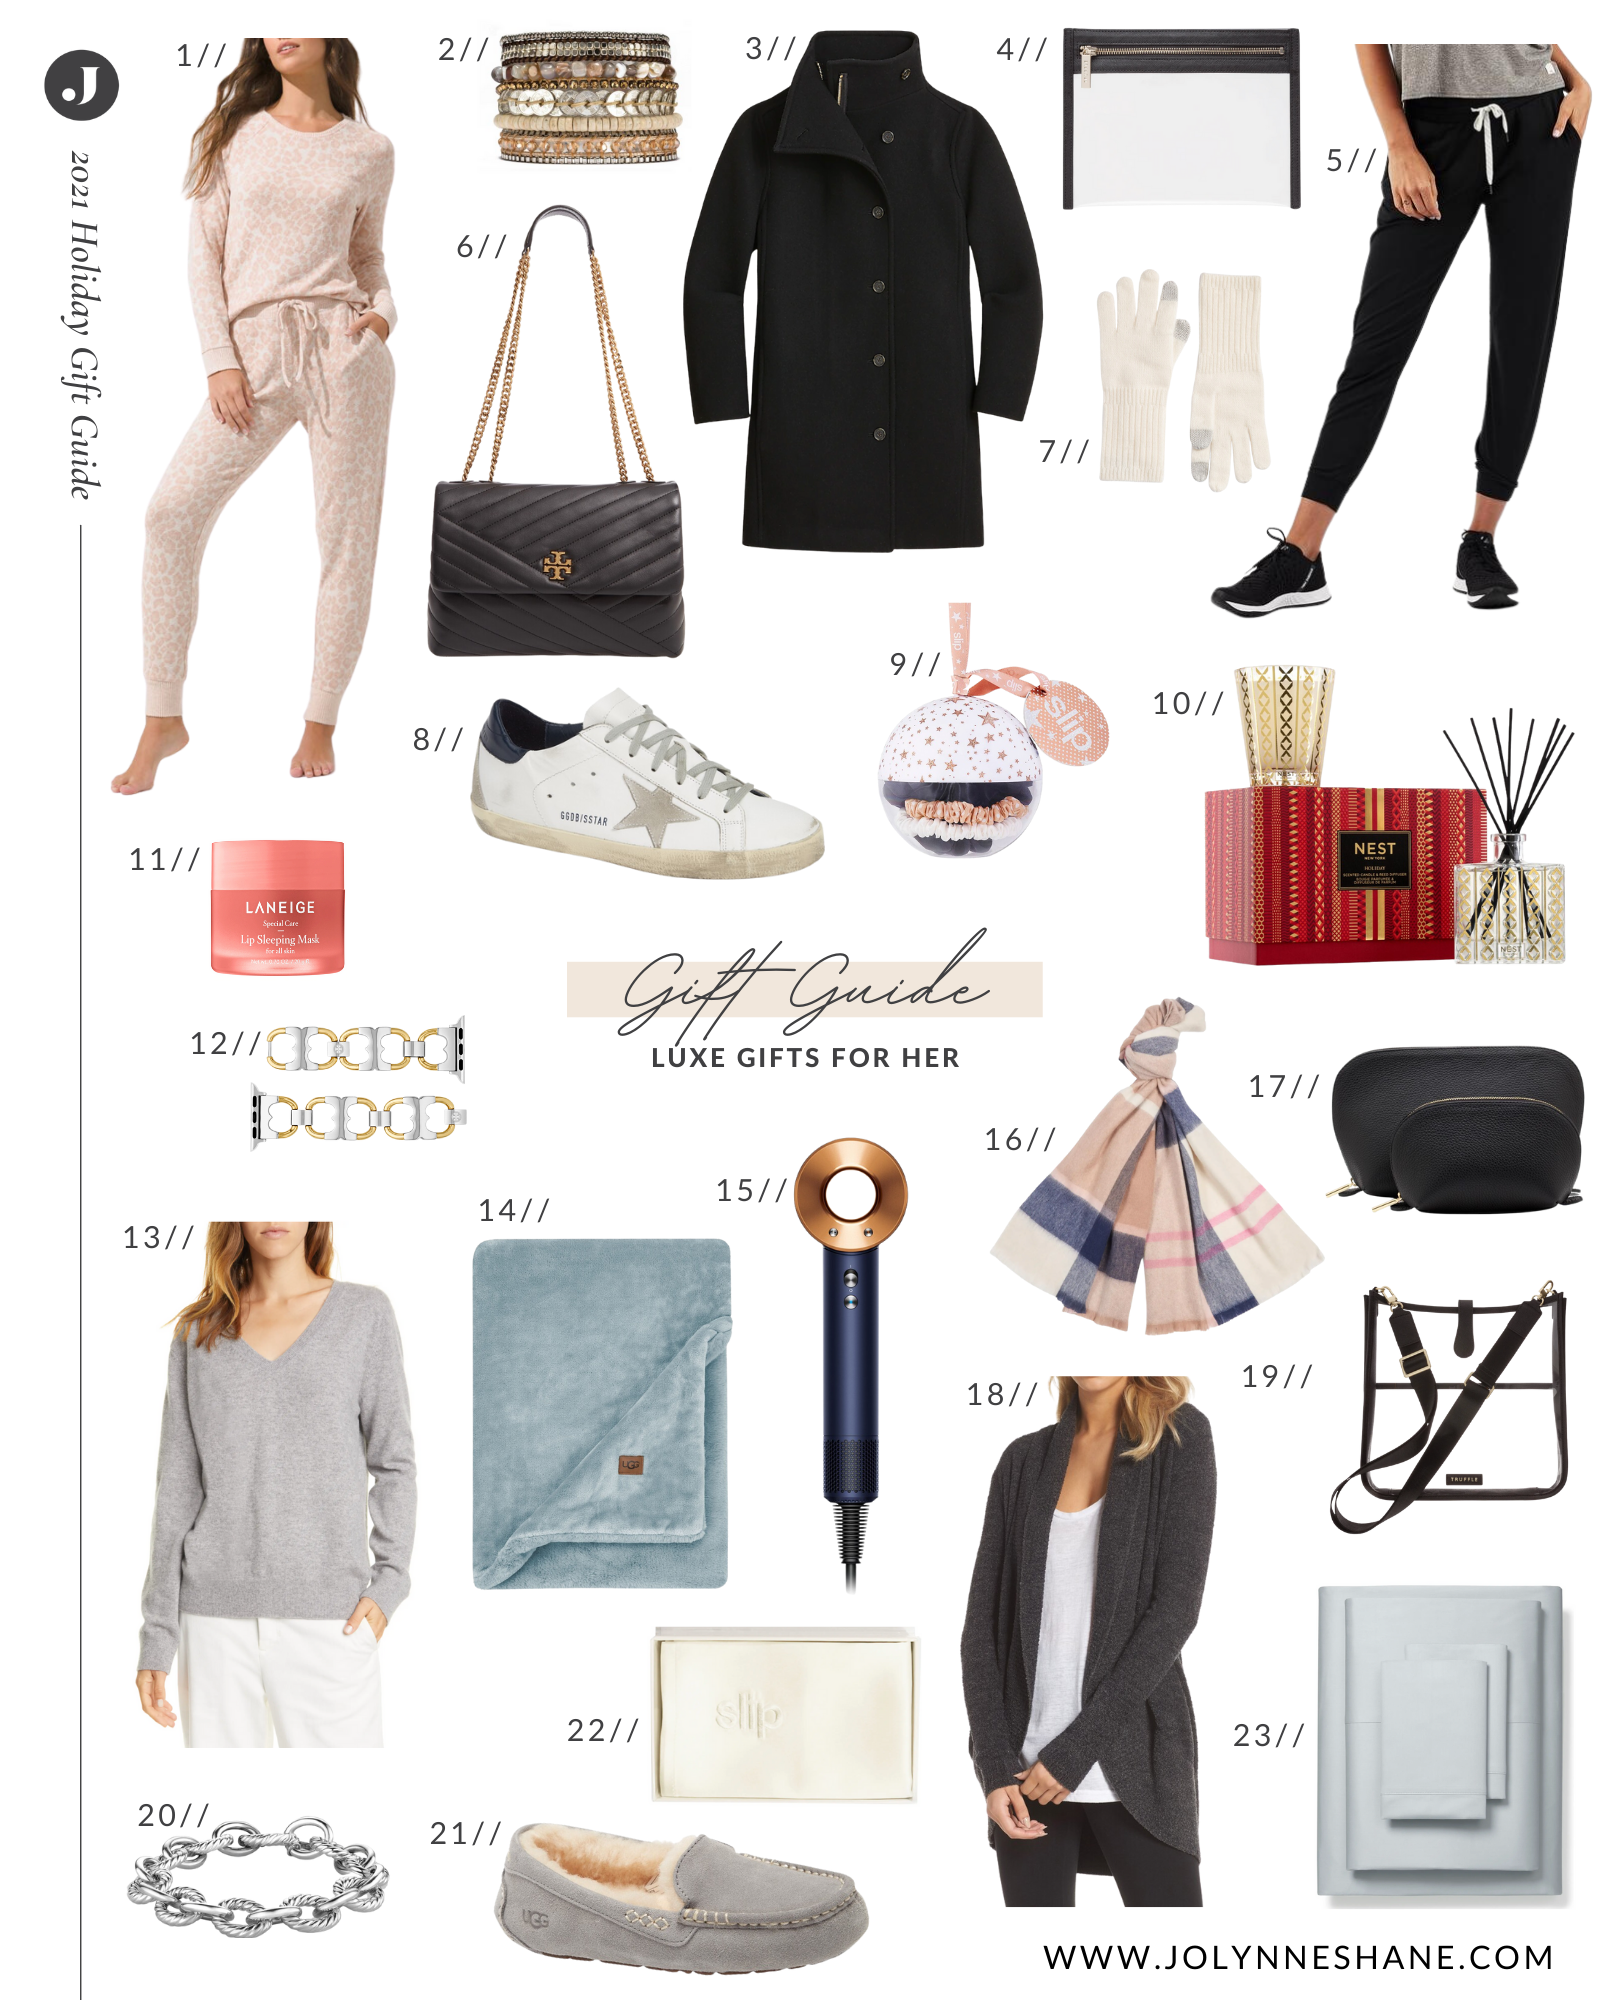 https://jolynneshane.com/wp-content/uploads/2021/10/Luxe-Gift-Guide-for-the-Woman-Who-Has-Everything-6.png